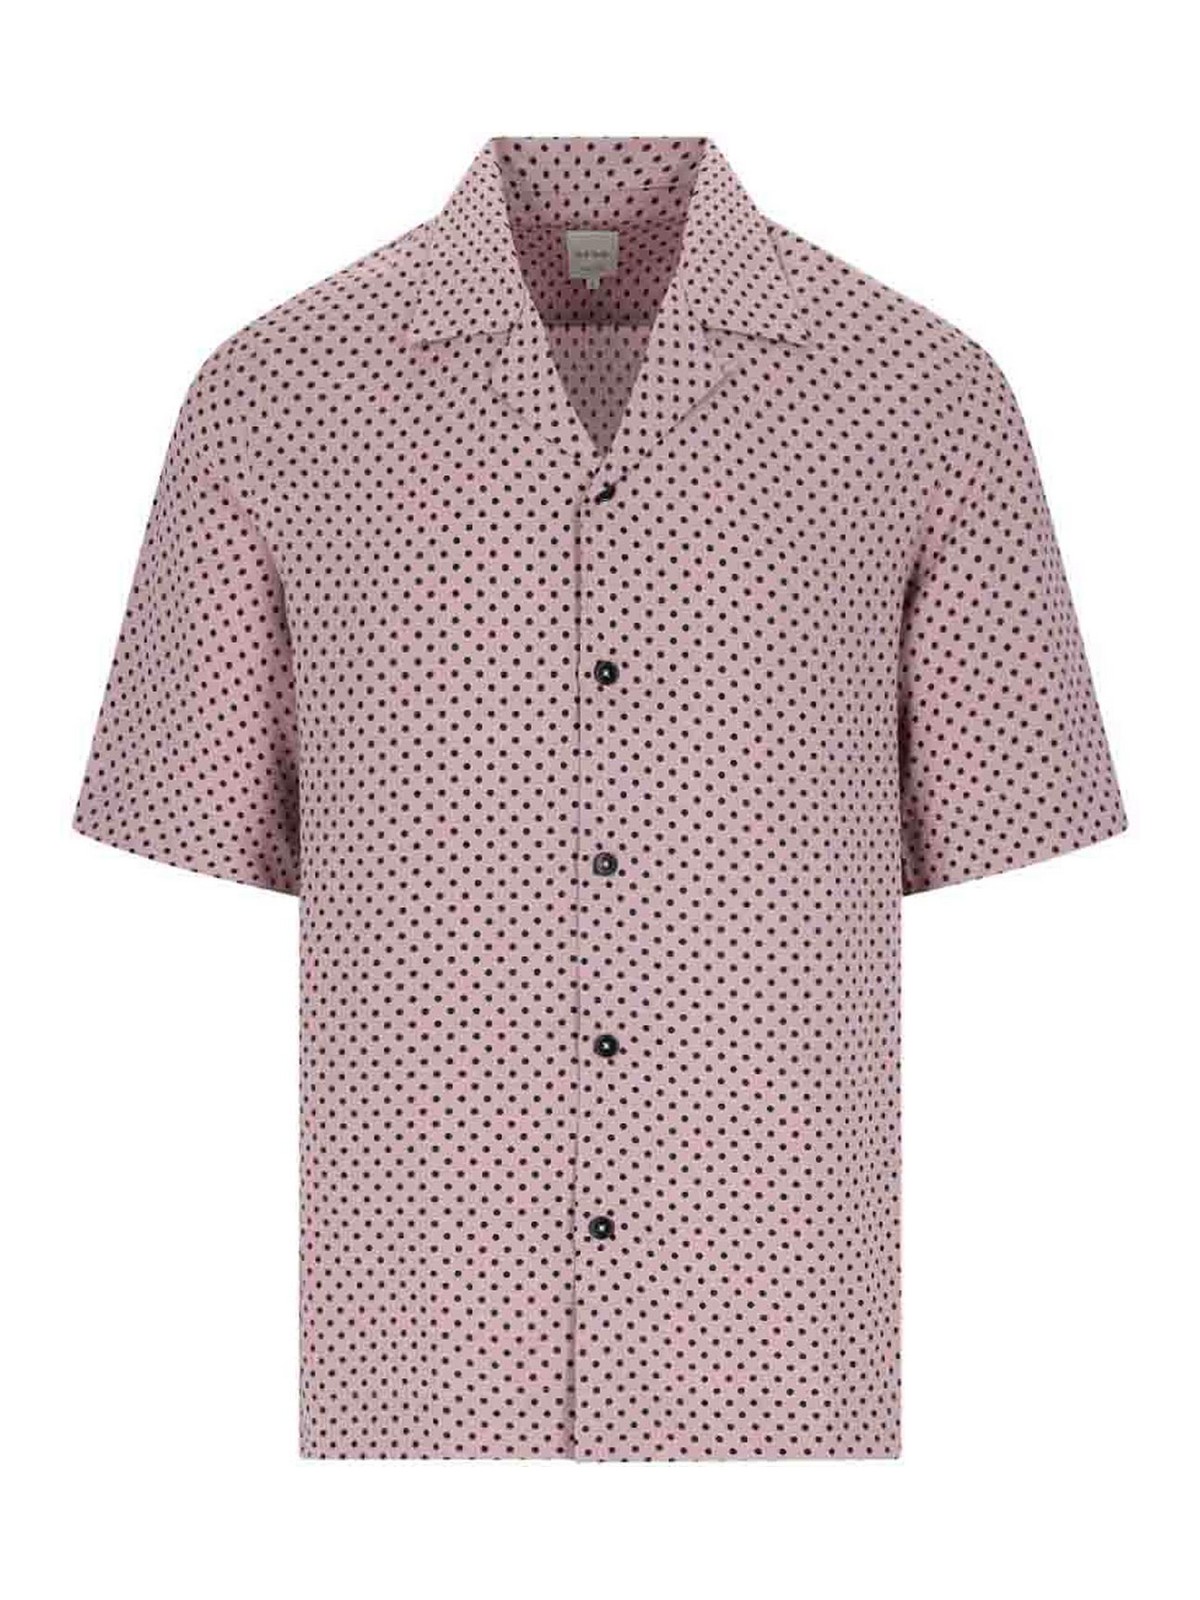 Shop Paul Smith Pois Shirt In Nude & Neutrals